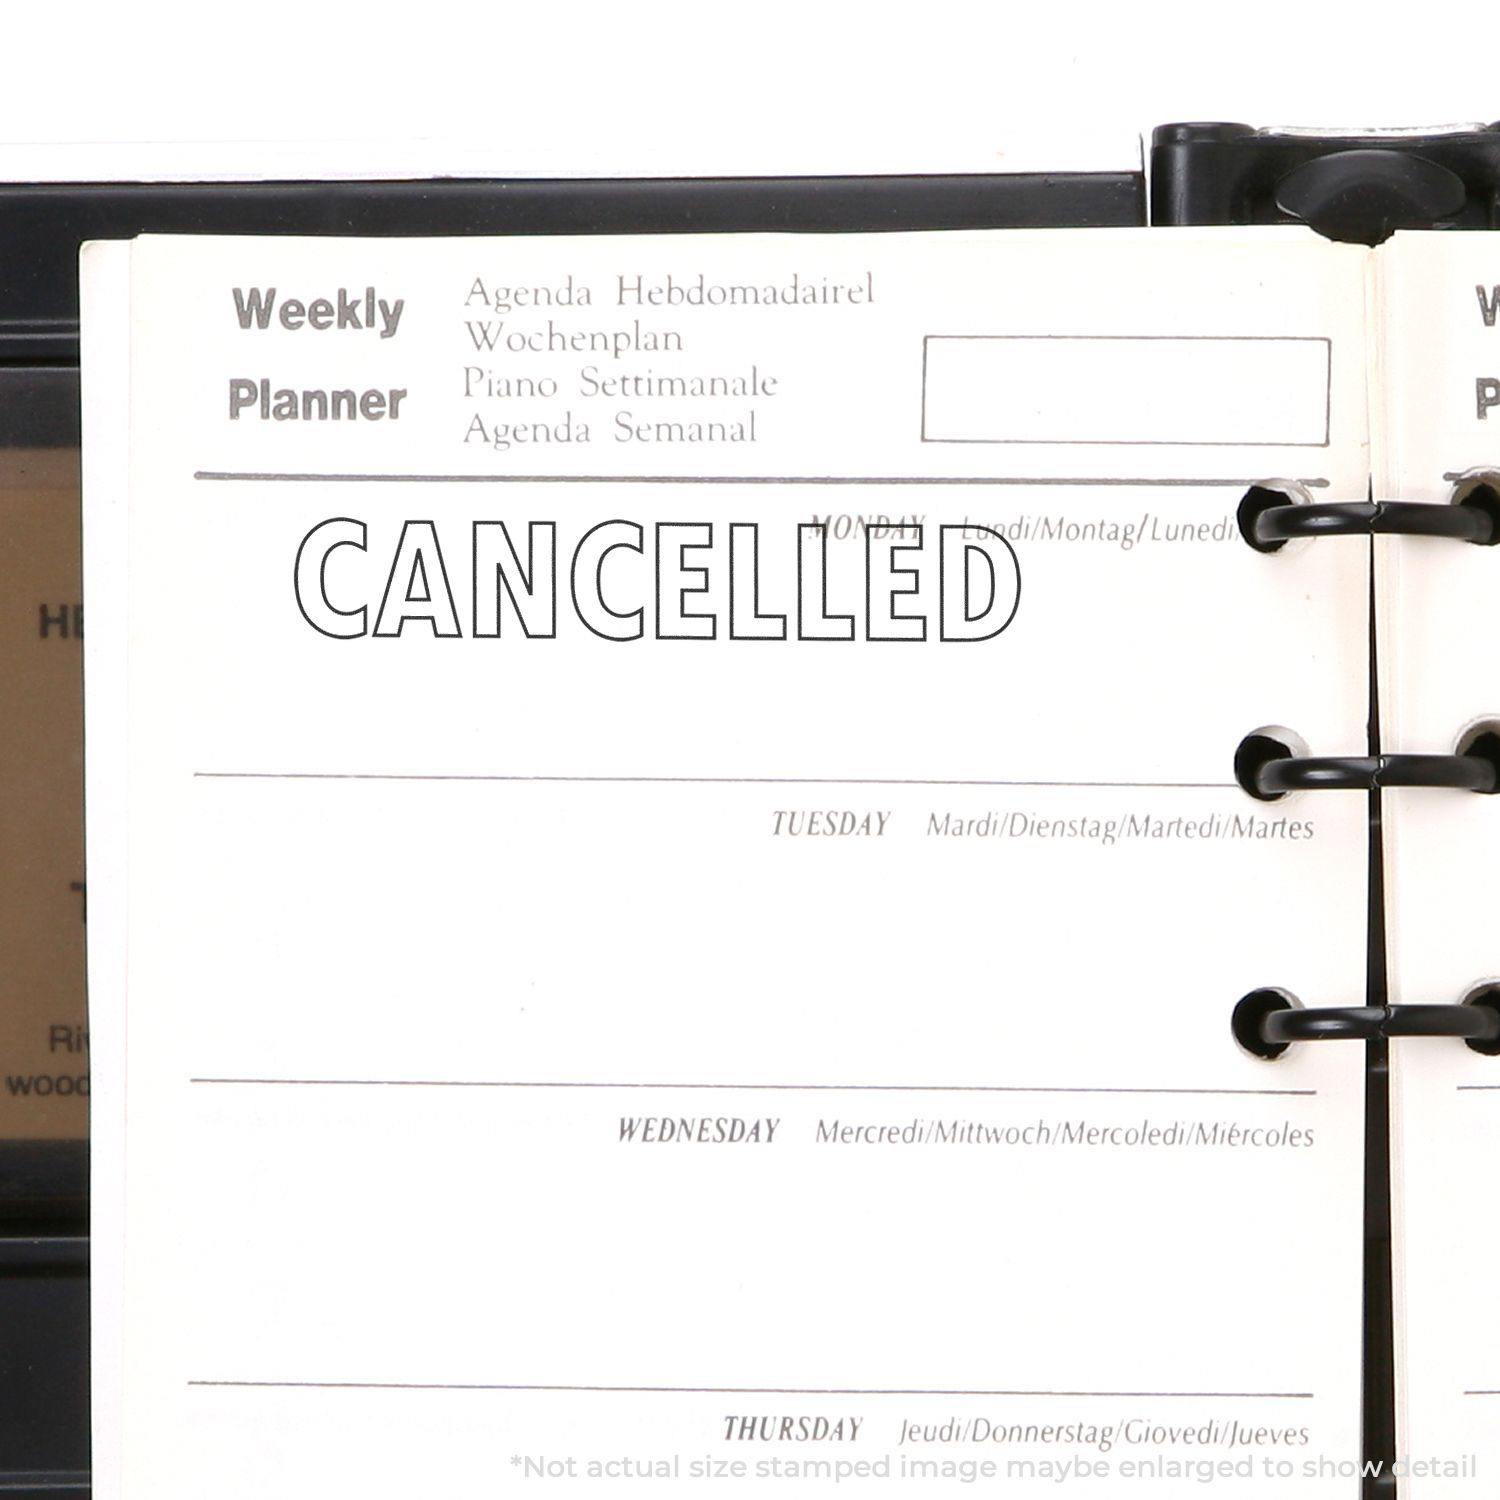 A stock office rubber stamp with a stamped image showing how the text "CANCELLED" in a large font and outline style is displayed after stamping.